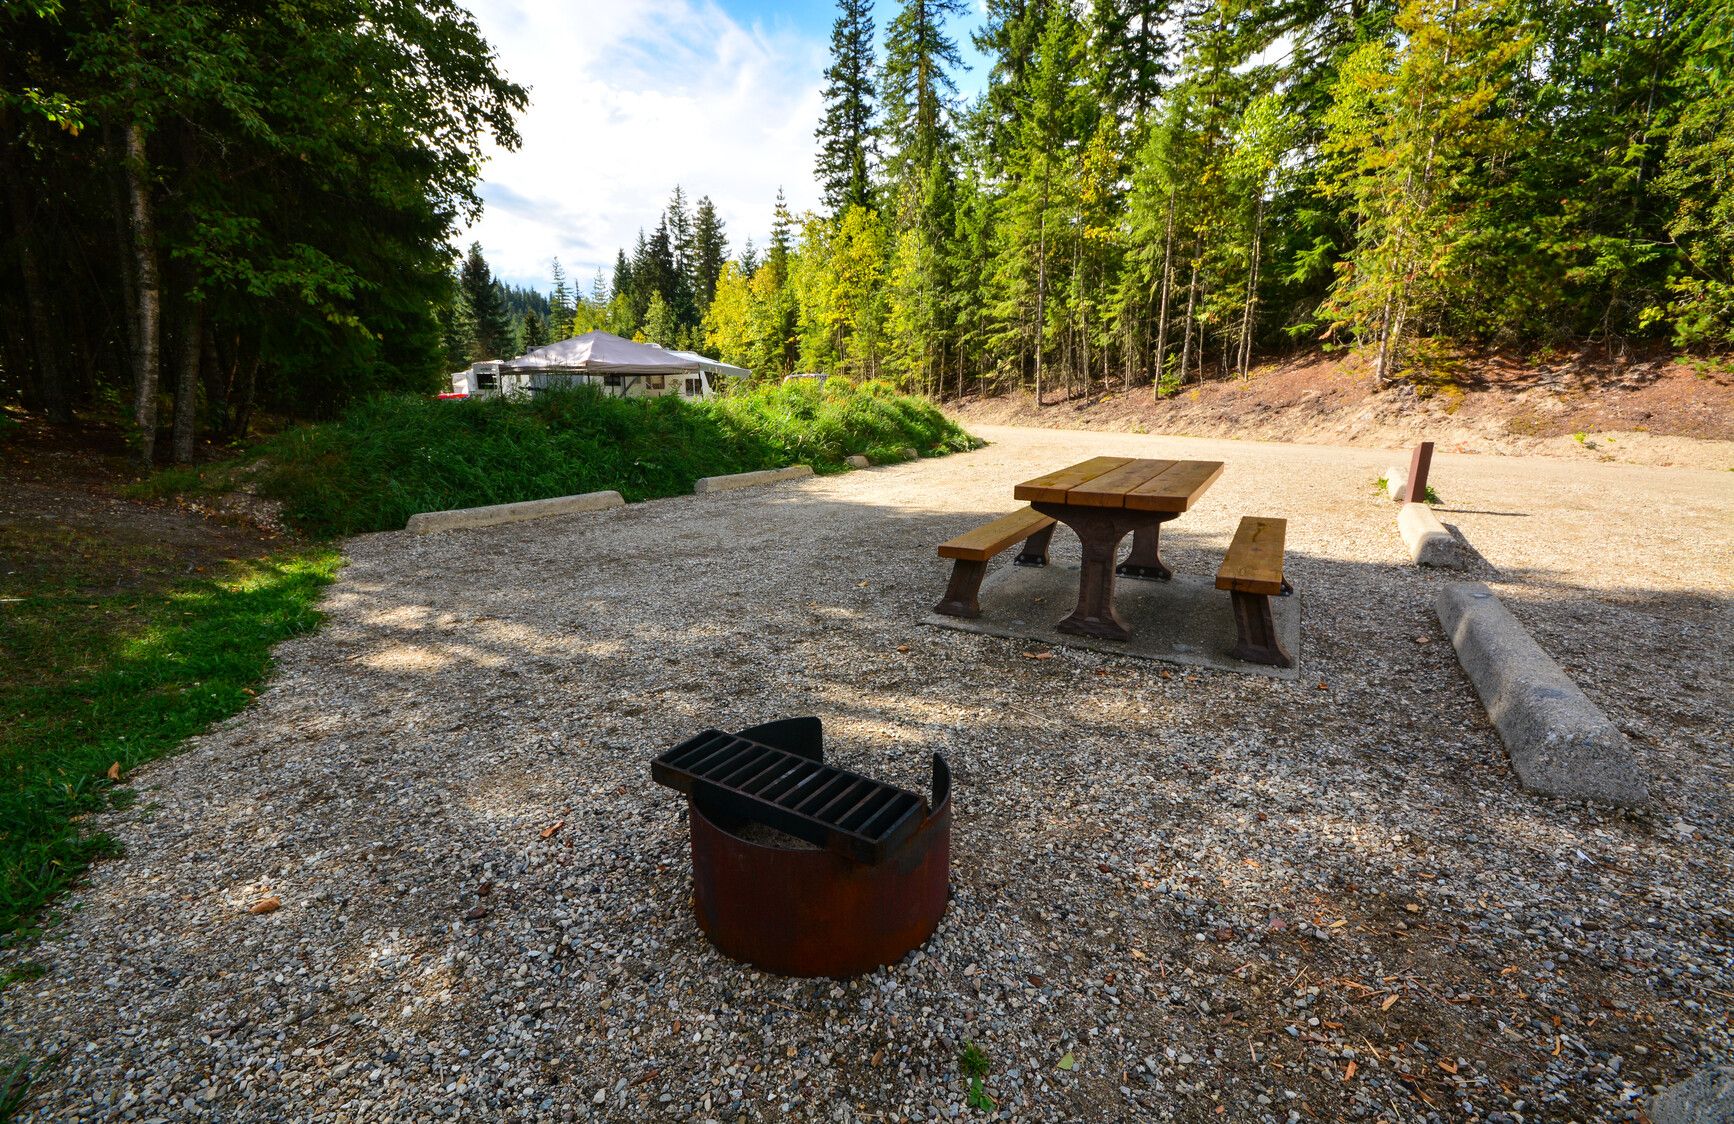 A campsite in Arrow Lakes Provincial Park, Shelter Bay Site.